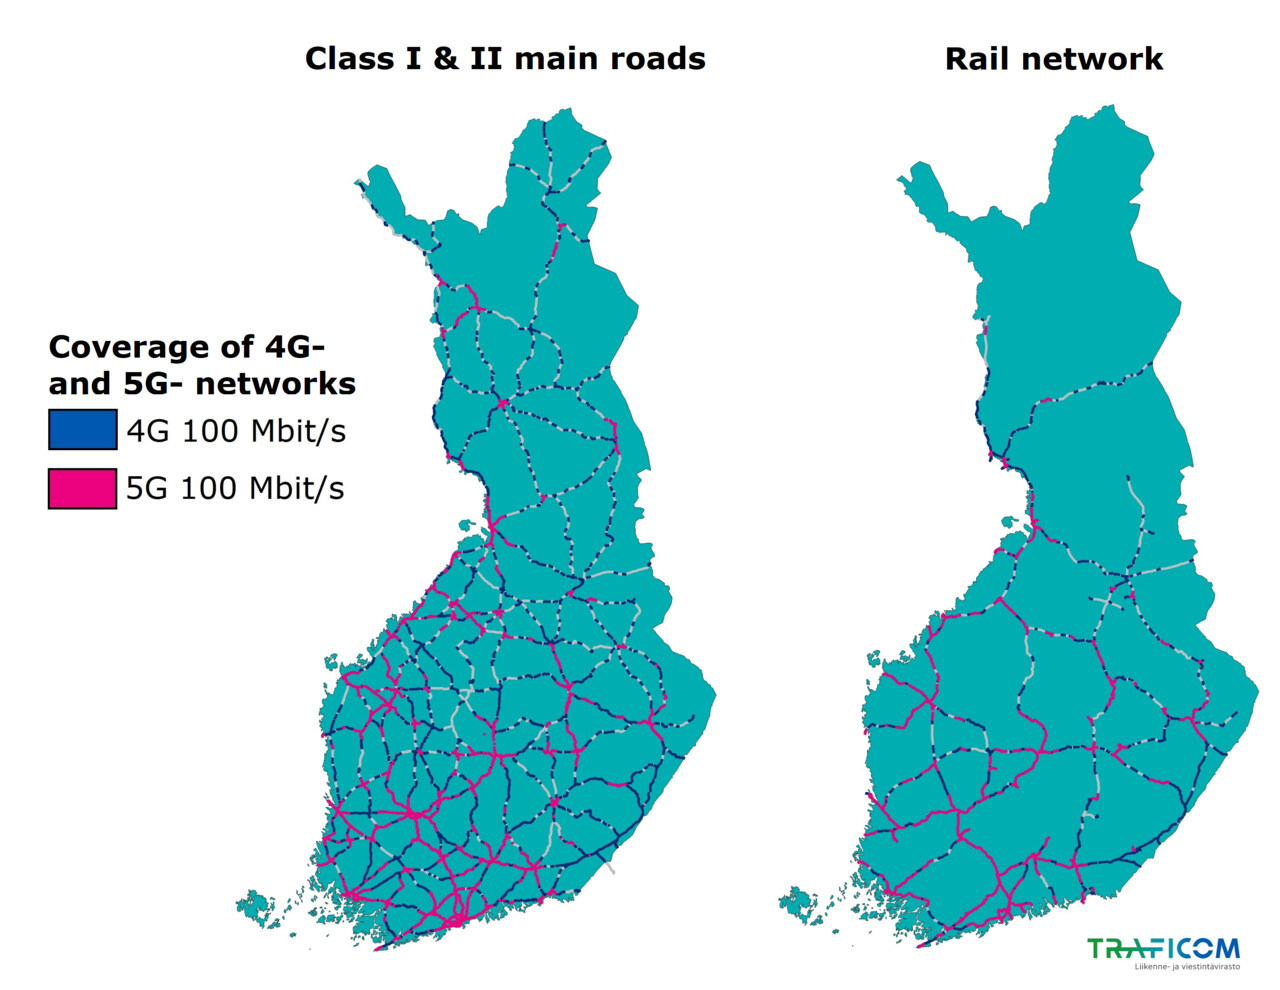 The map shows the coverage of 4G and 5G networks with a download speed of 100 Mbps in Finland along main roads and highways and the railway network at the end of December 2021.